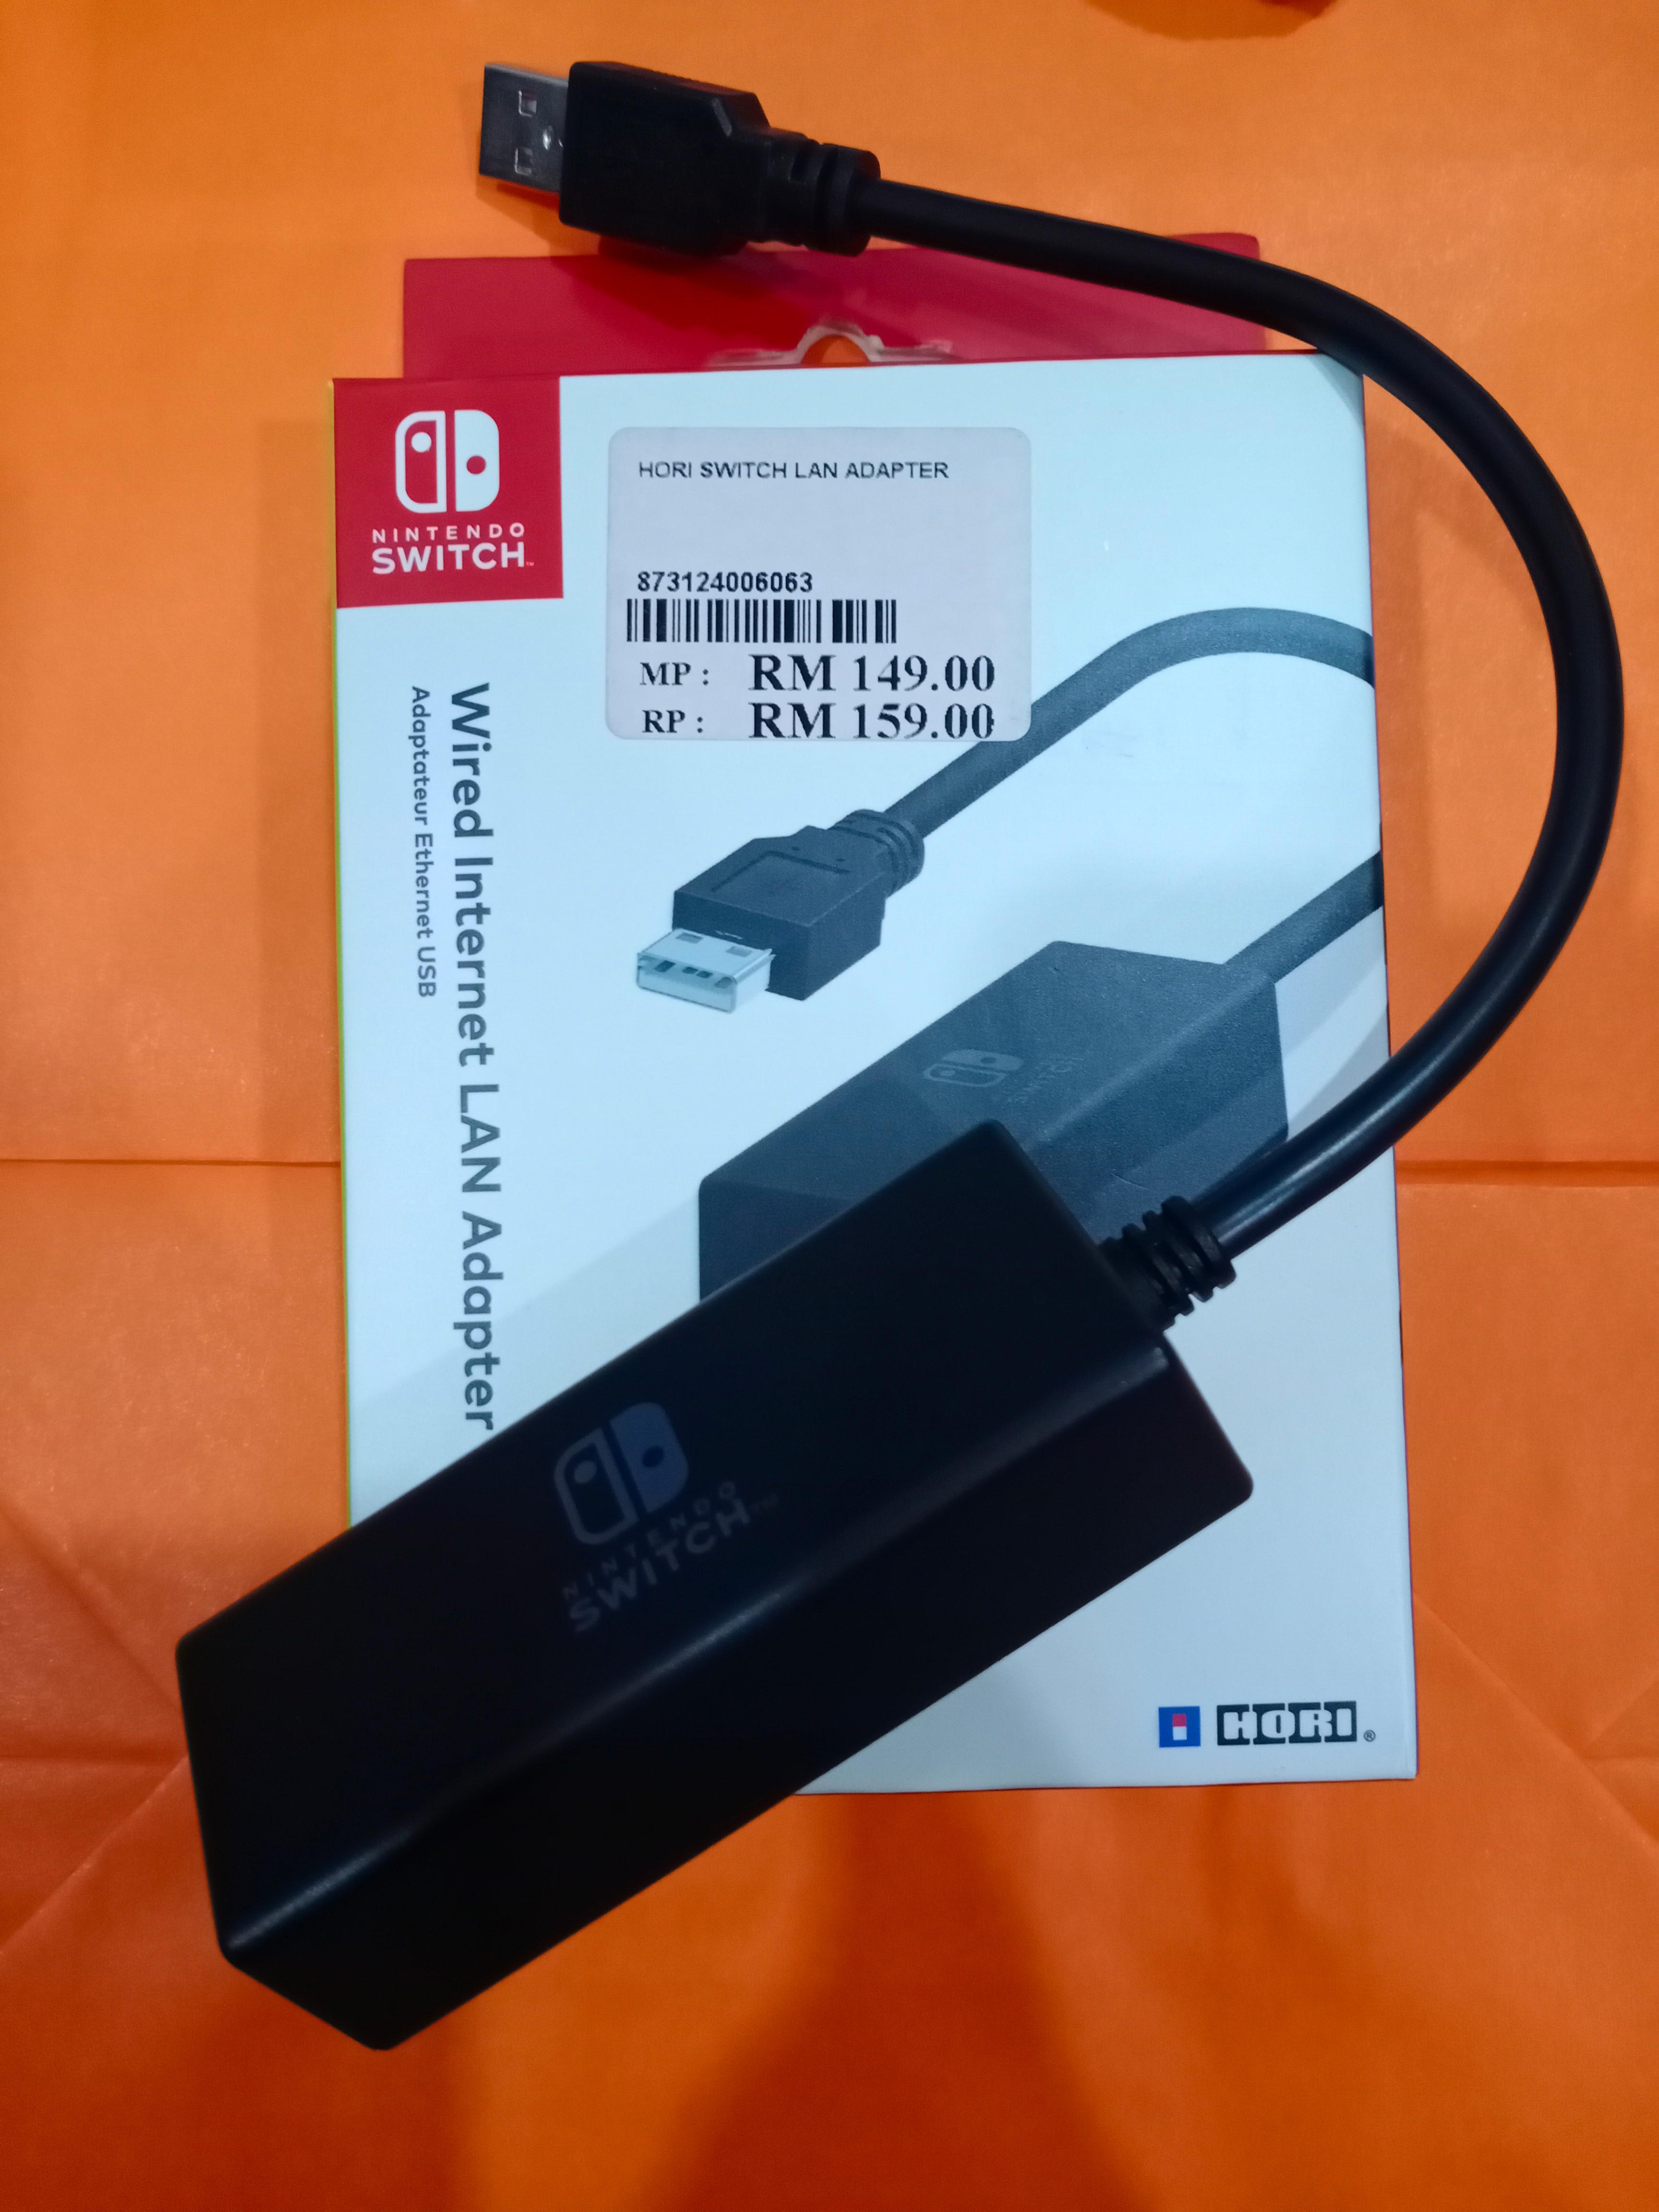 Nintendo Switch Wired Internet LAN Adapter by HORI Officially Licensed by  Nintendo, Case